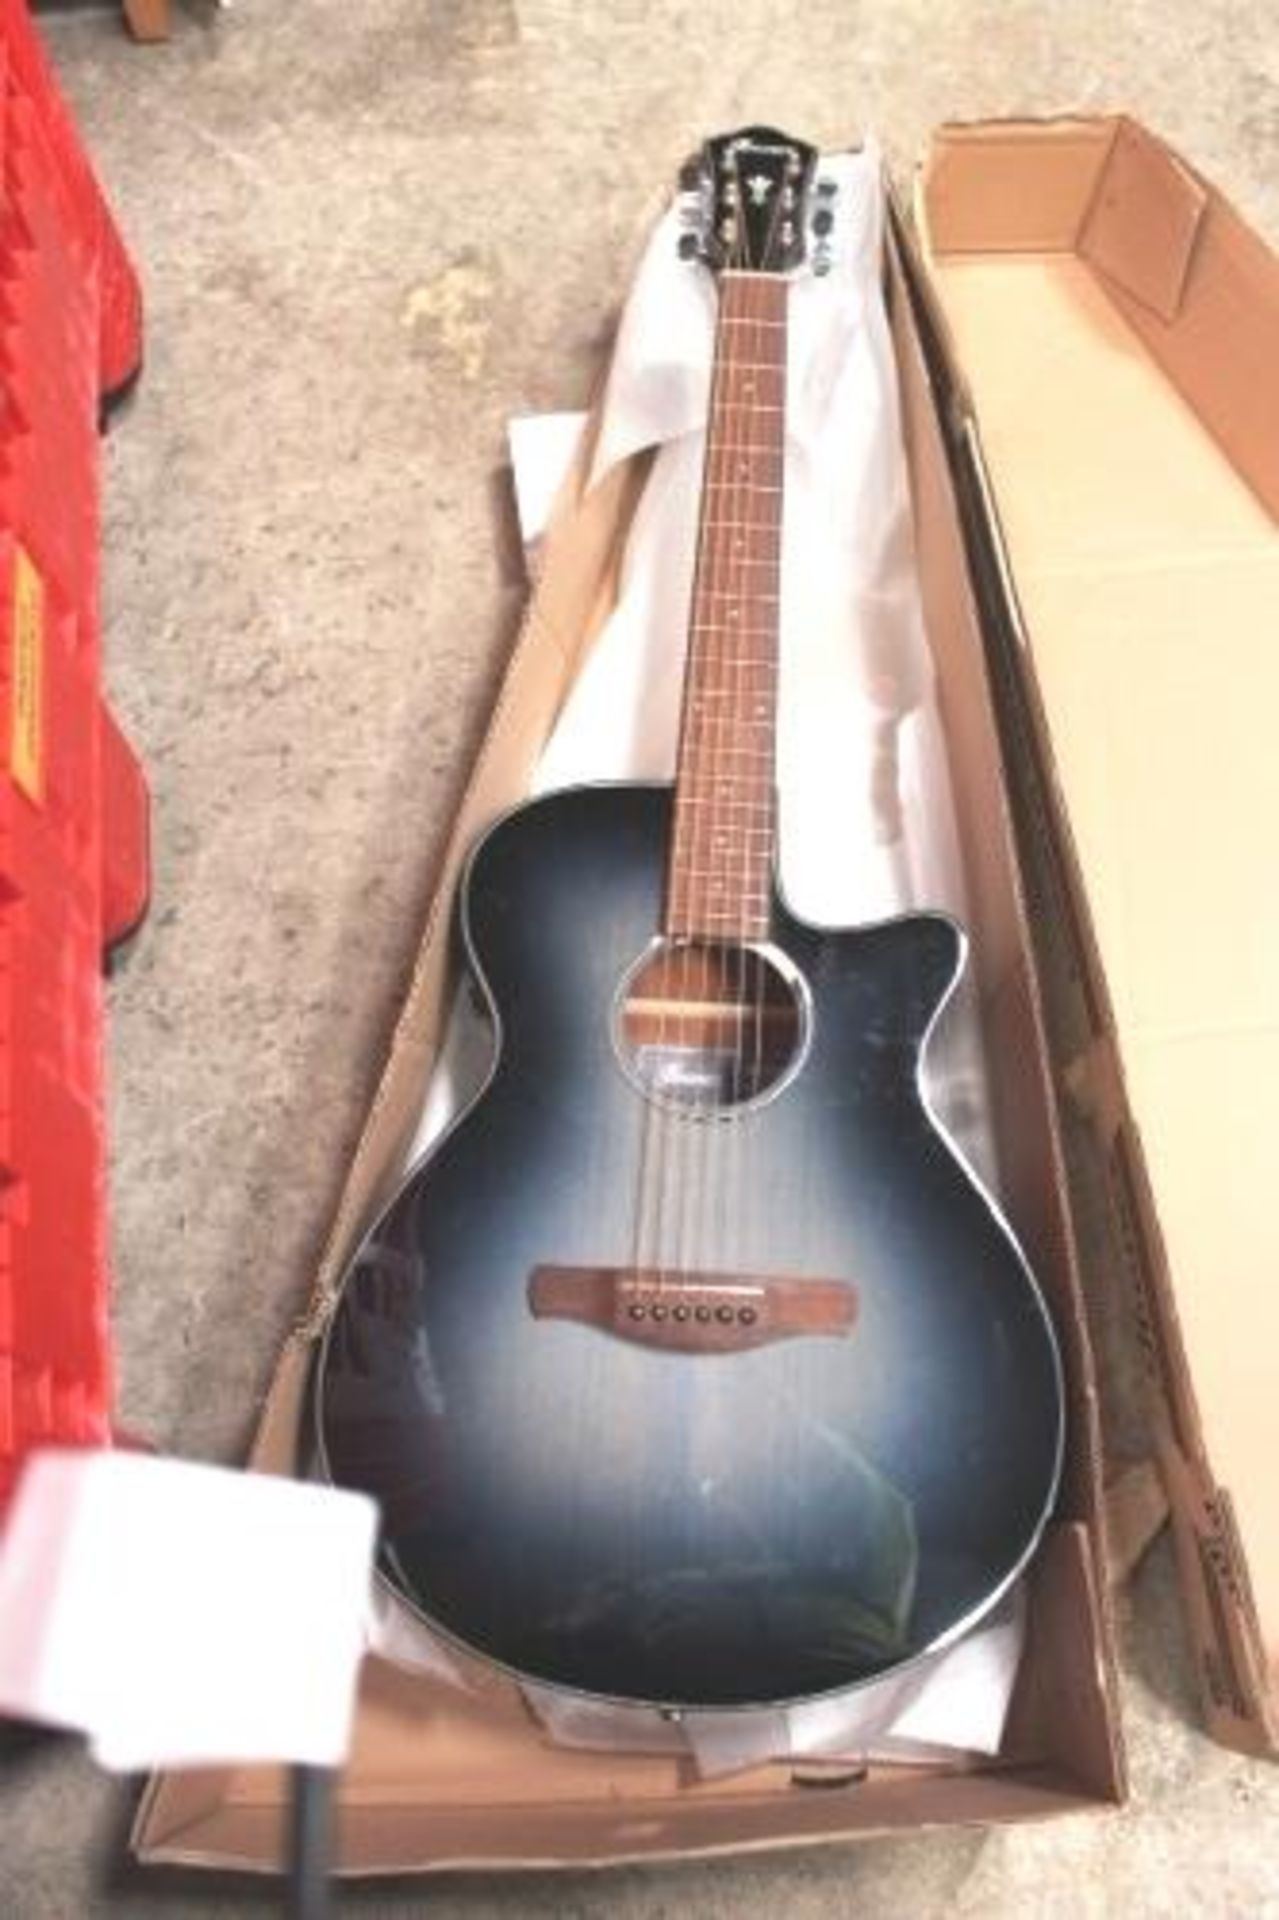 Ibanez AEG50-IBH acoustic guitar with broken neck - In box